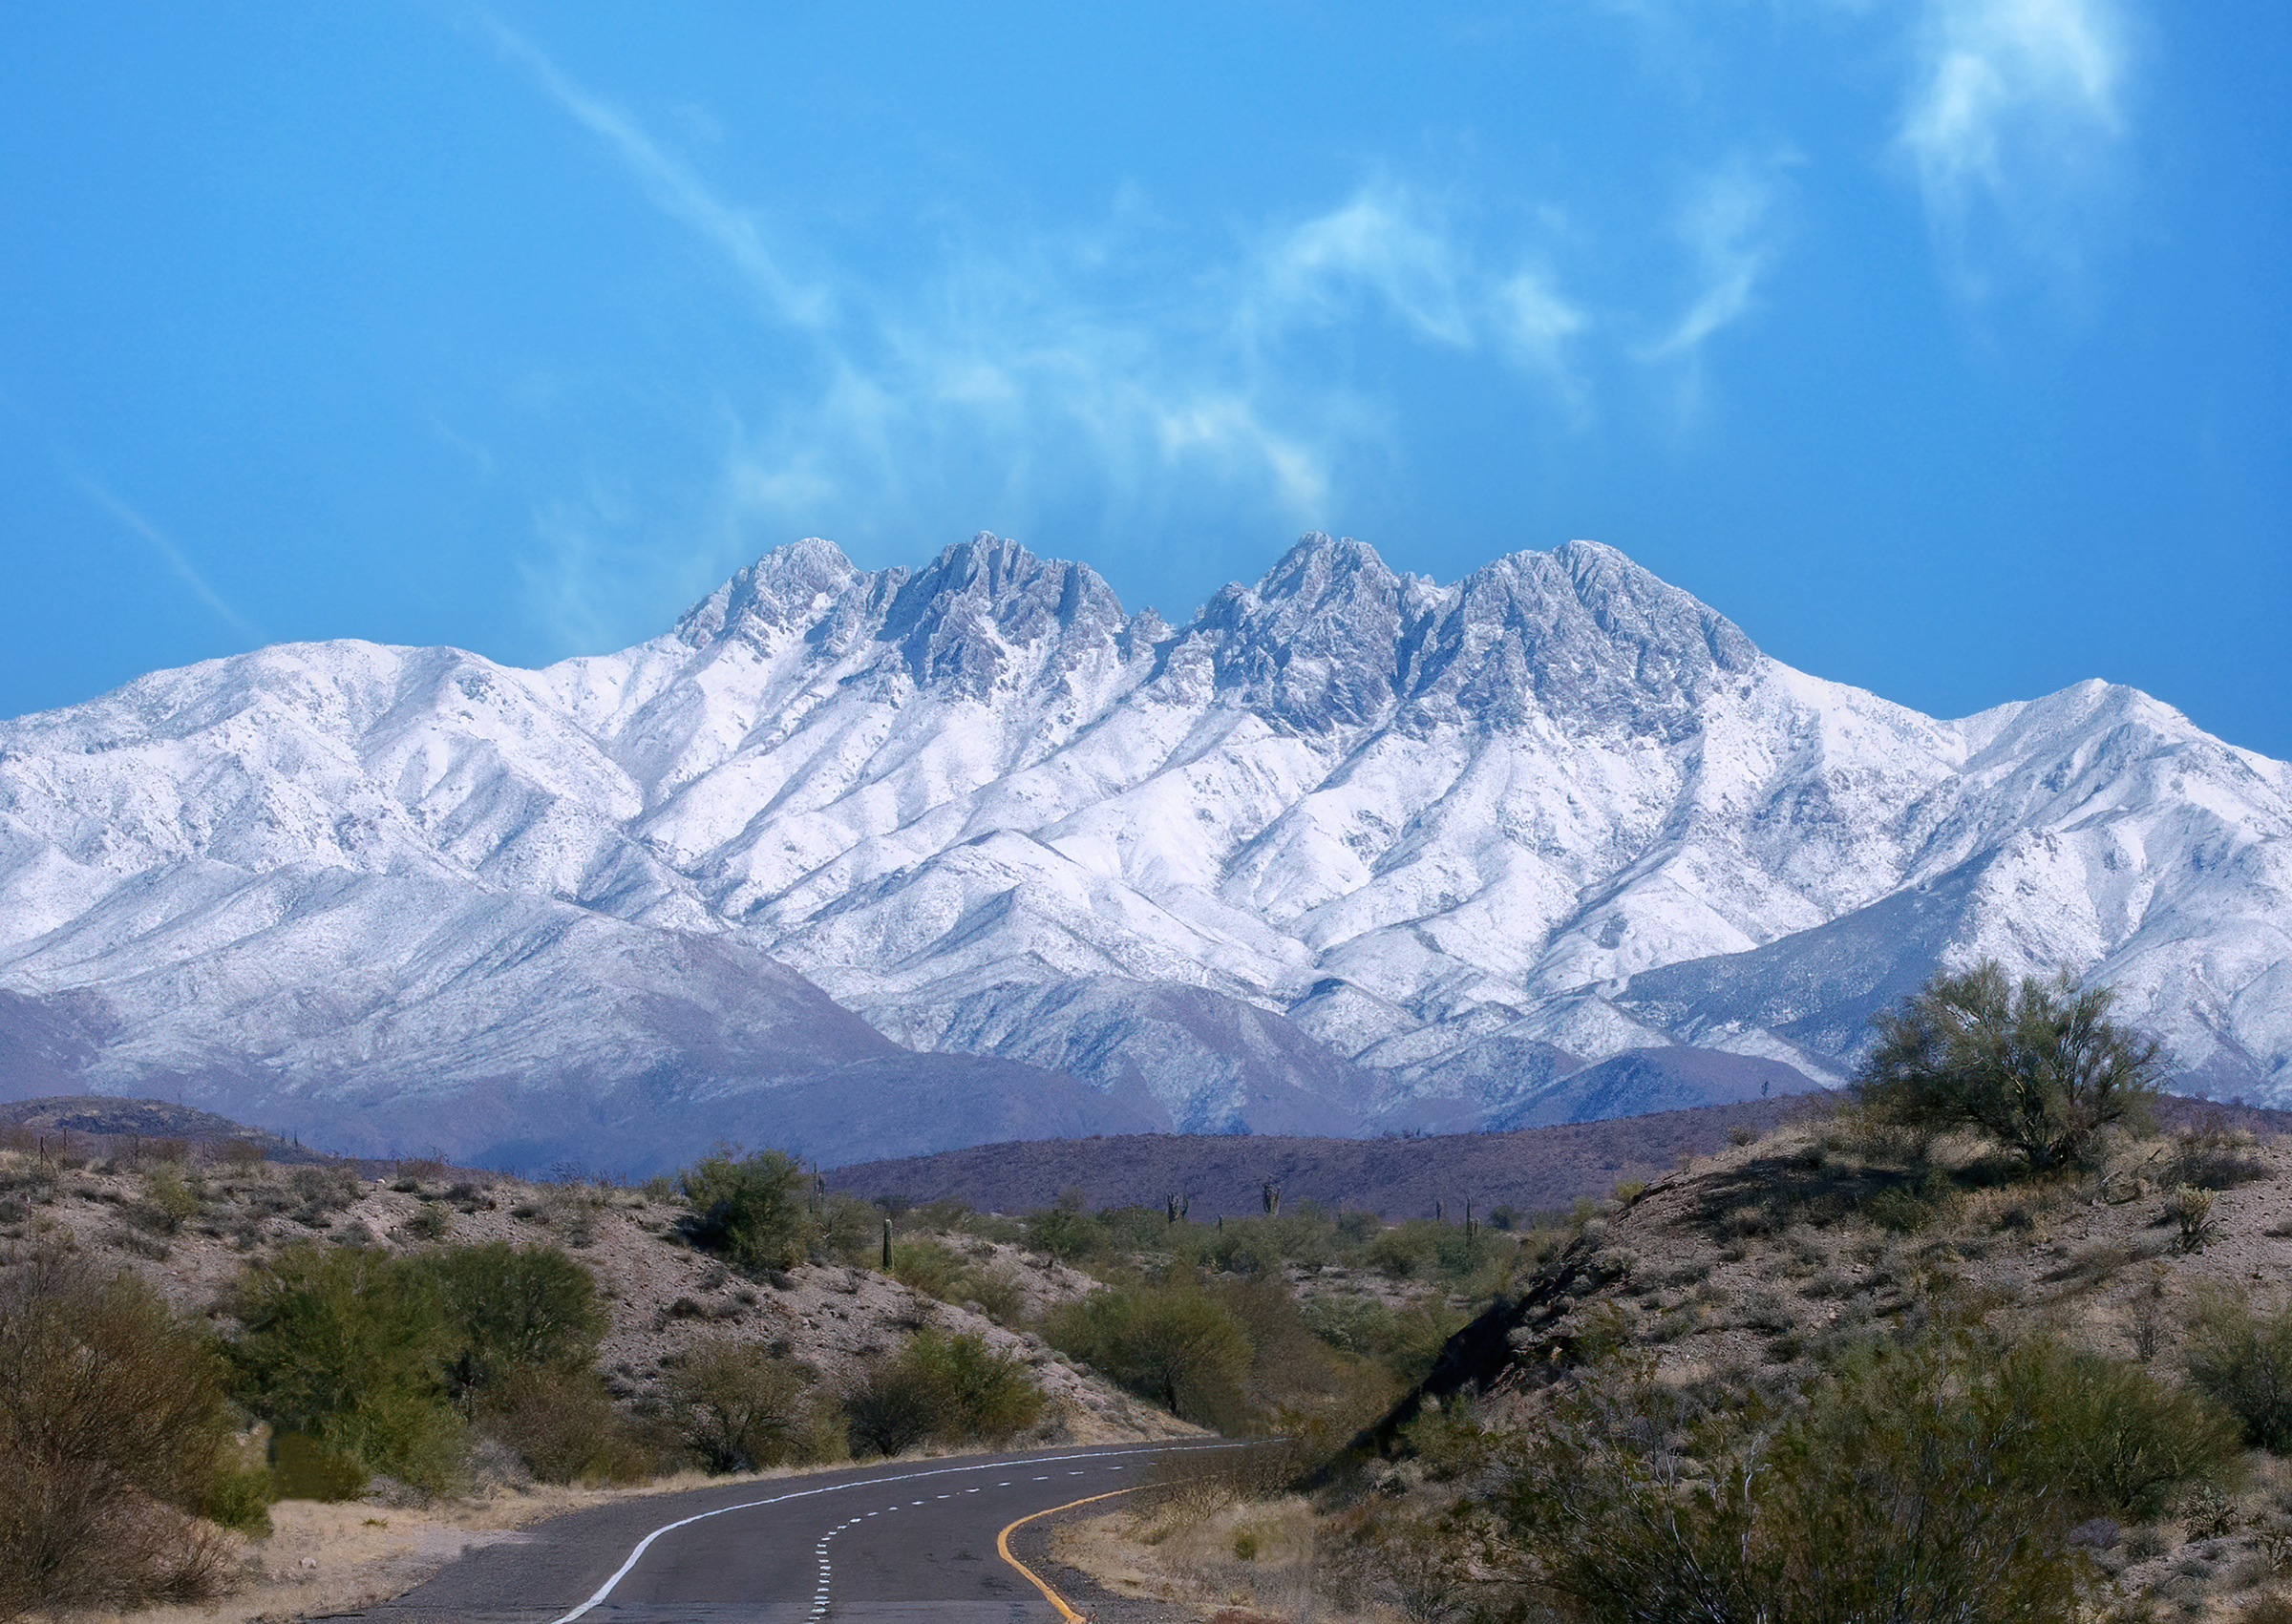 The road to Four Peaks